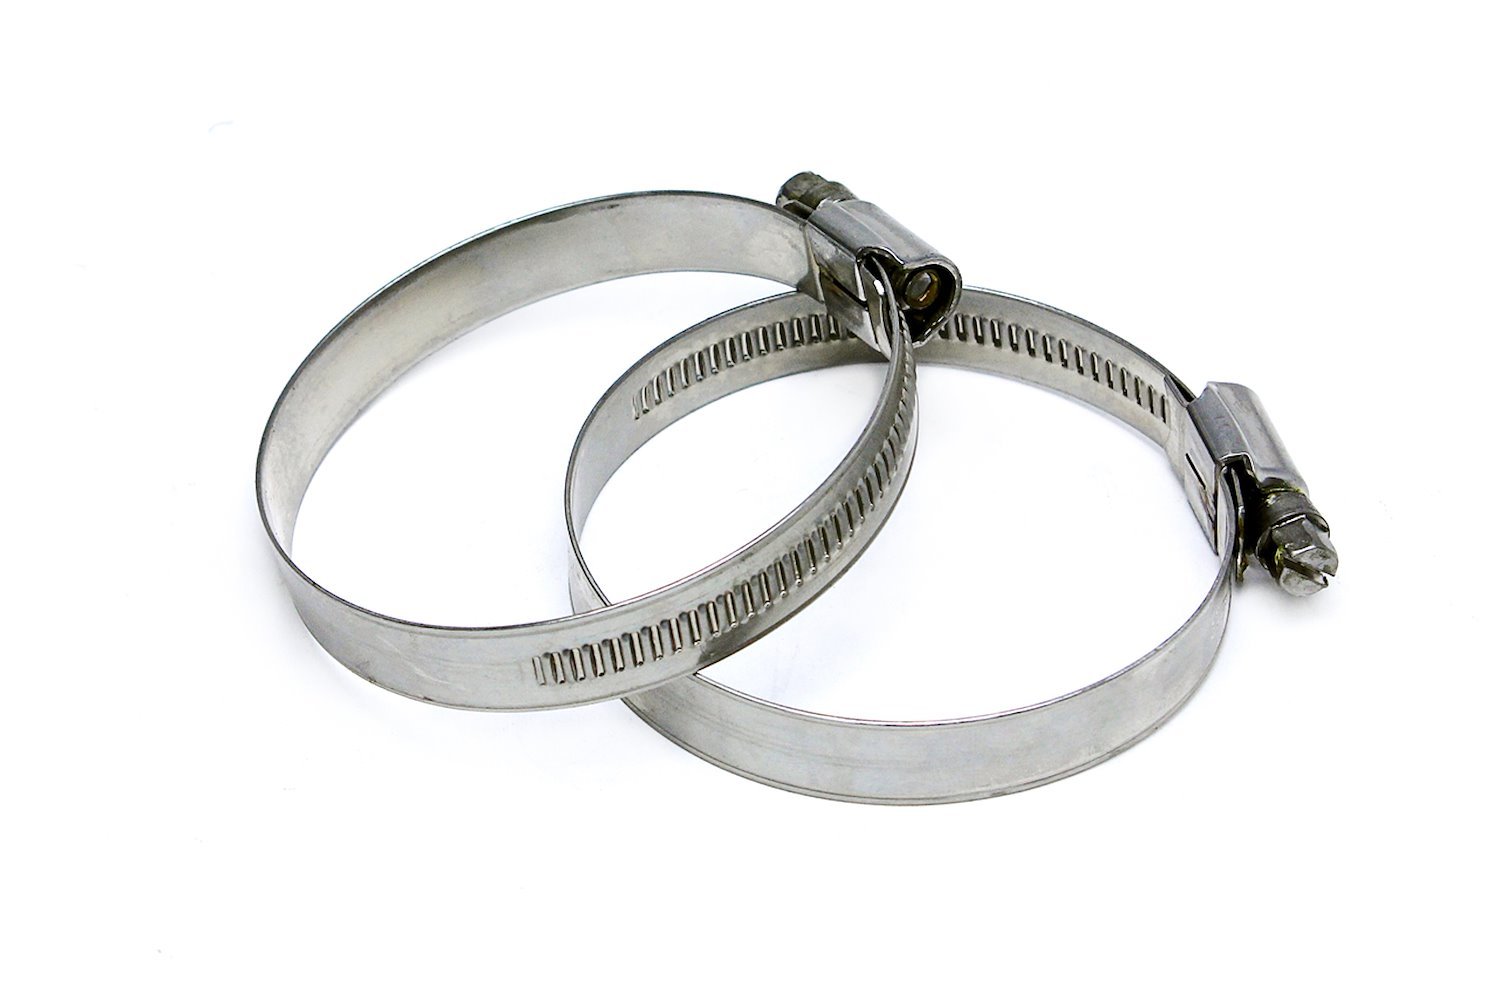 EMSC-70-90x2 Embossed Hose Clamp, Stainless Steel Embossed Hose Clamp, Size #48, Effective Range: 2-3/4 in.- 3-1/2 in., 2Pc